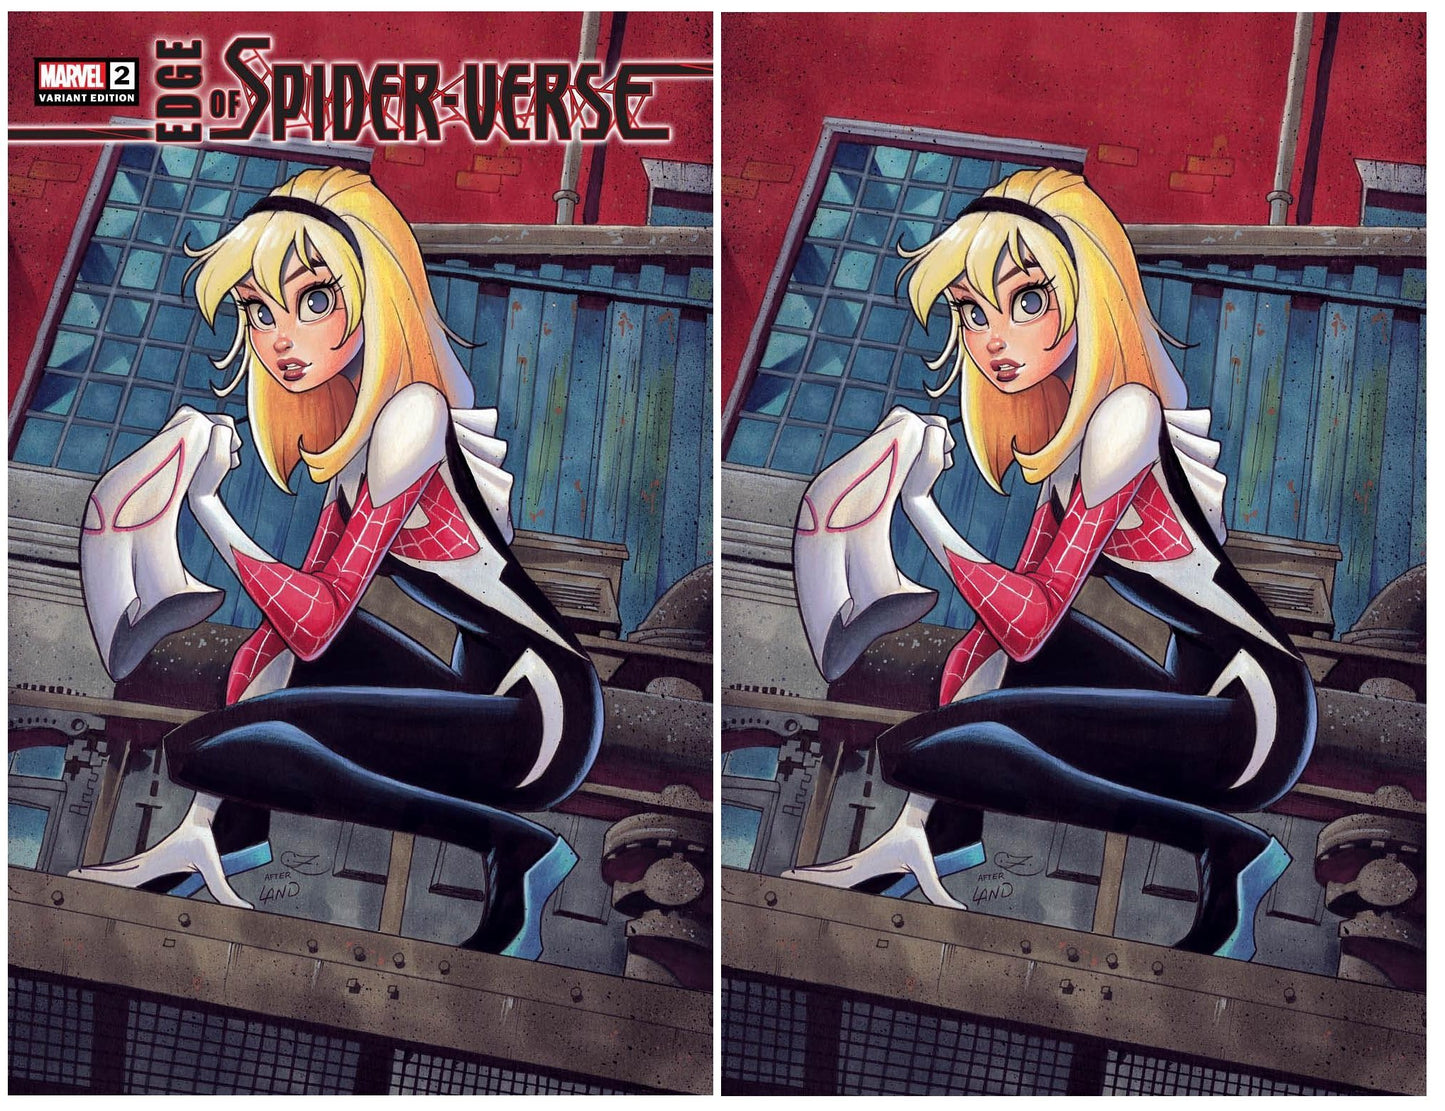 EDGE OF SPIDER-VERSE #2 CHRISSIE ZULLO TRADE/VIRGIN VARIANT SET LIMITED TO 600 SETS WITH NUMBERED COA